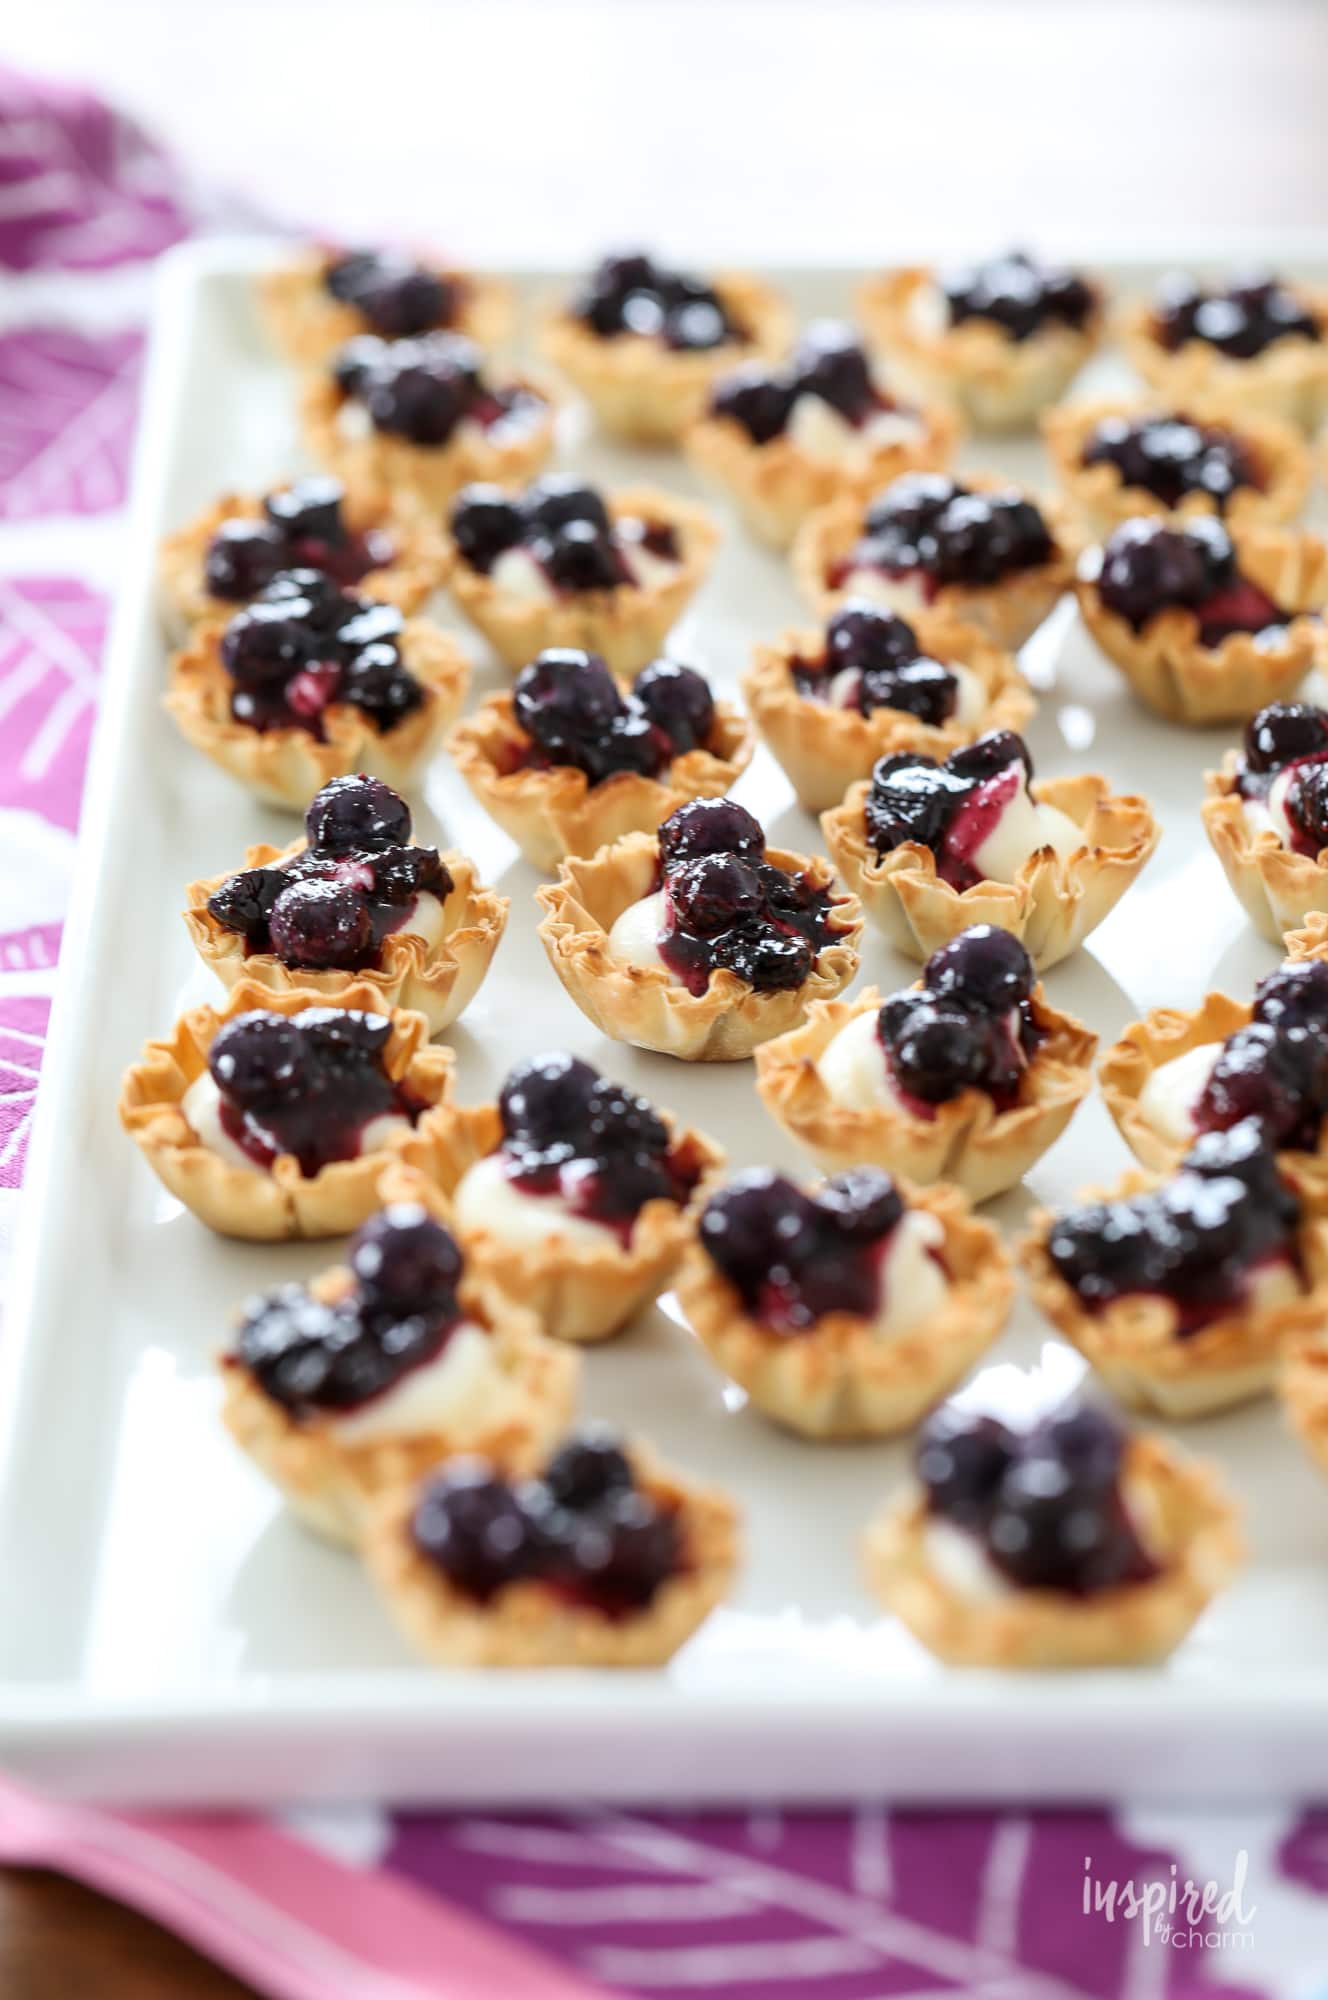 Mini Blueberry Cheesecakes arranged on a large white platter.